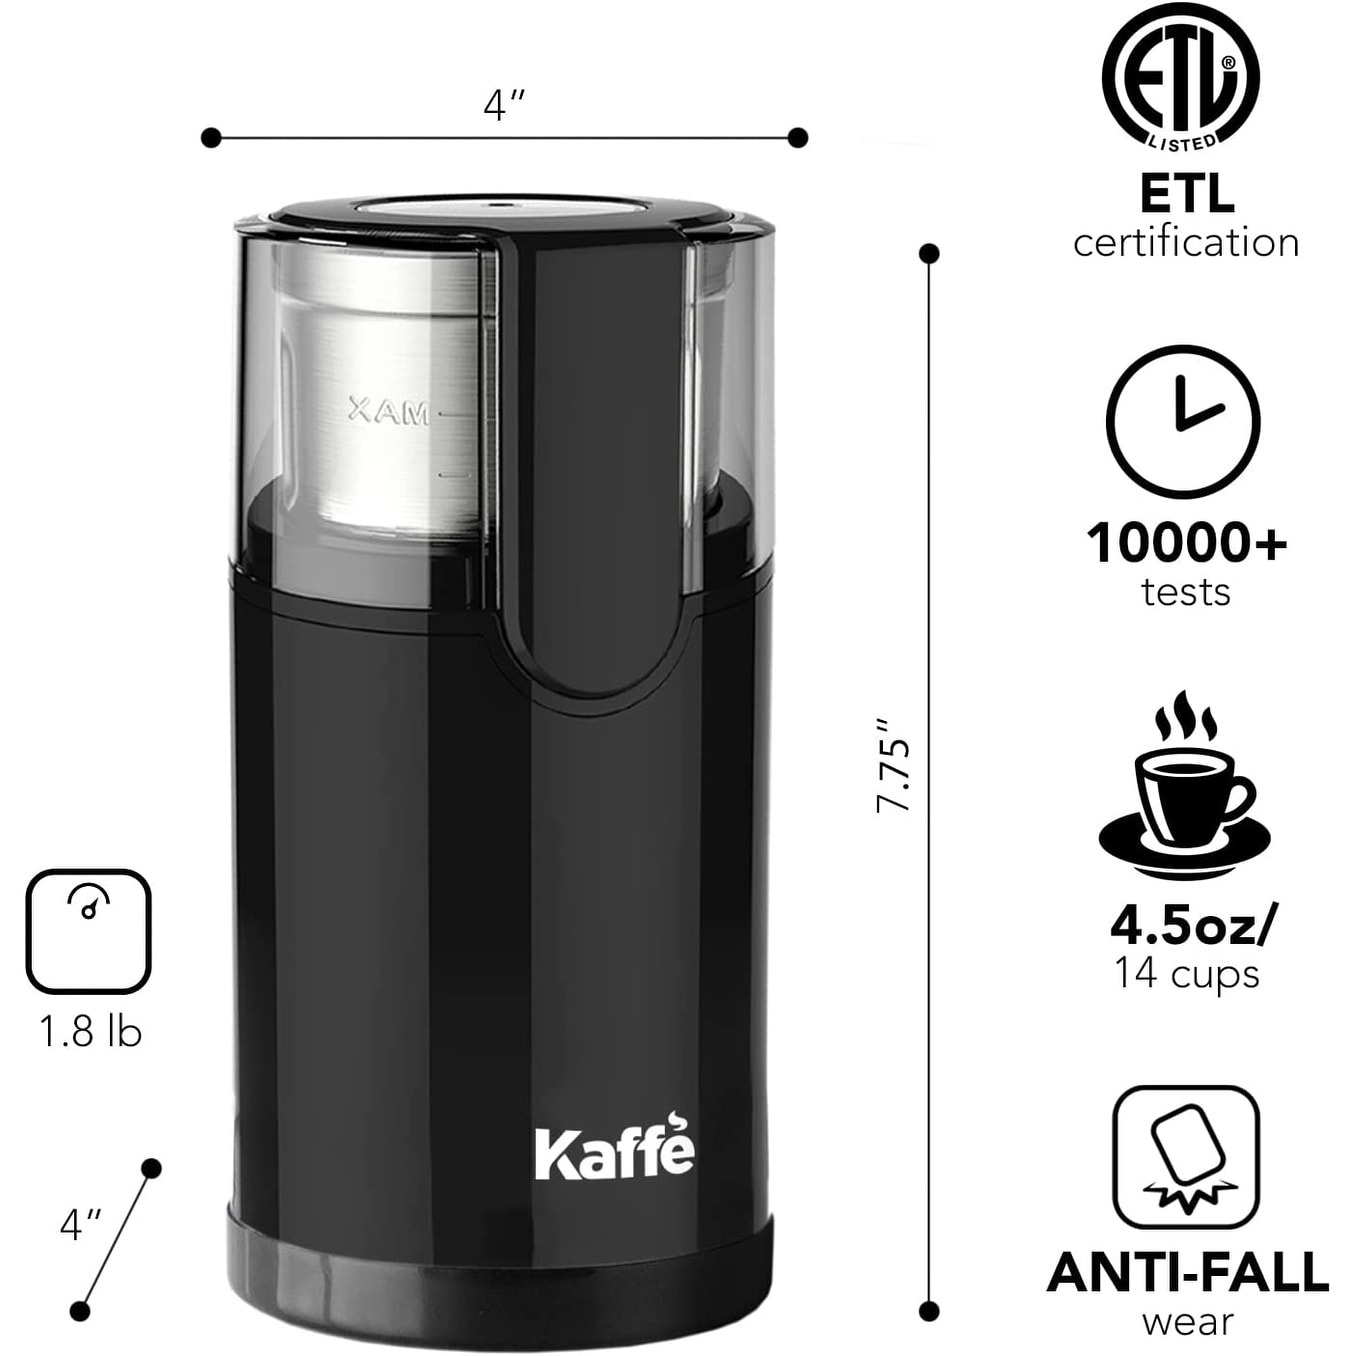 https://ak1.ostkcdn.com/images/products/is/images/direct/fcb88a8a0dfa61b6b250c9ec0aaf9dcee5beea2d/Kaffe-Electric-Blade-Coffee-Grinder-Removable-4.5oz-14-Cup-Capacity.jpg